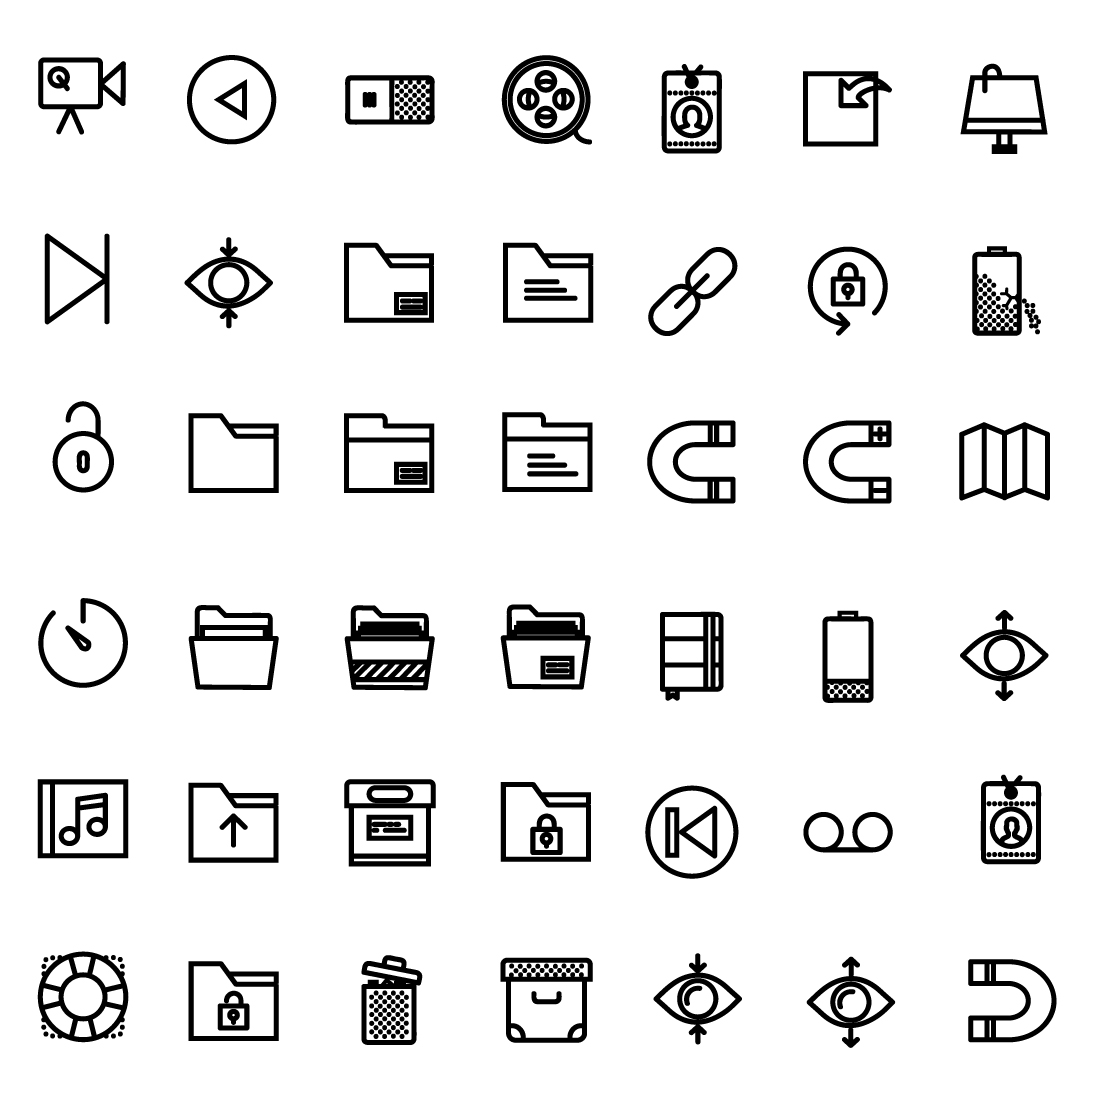 Large set of icons that are black and white.